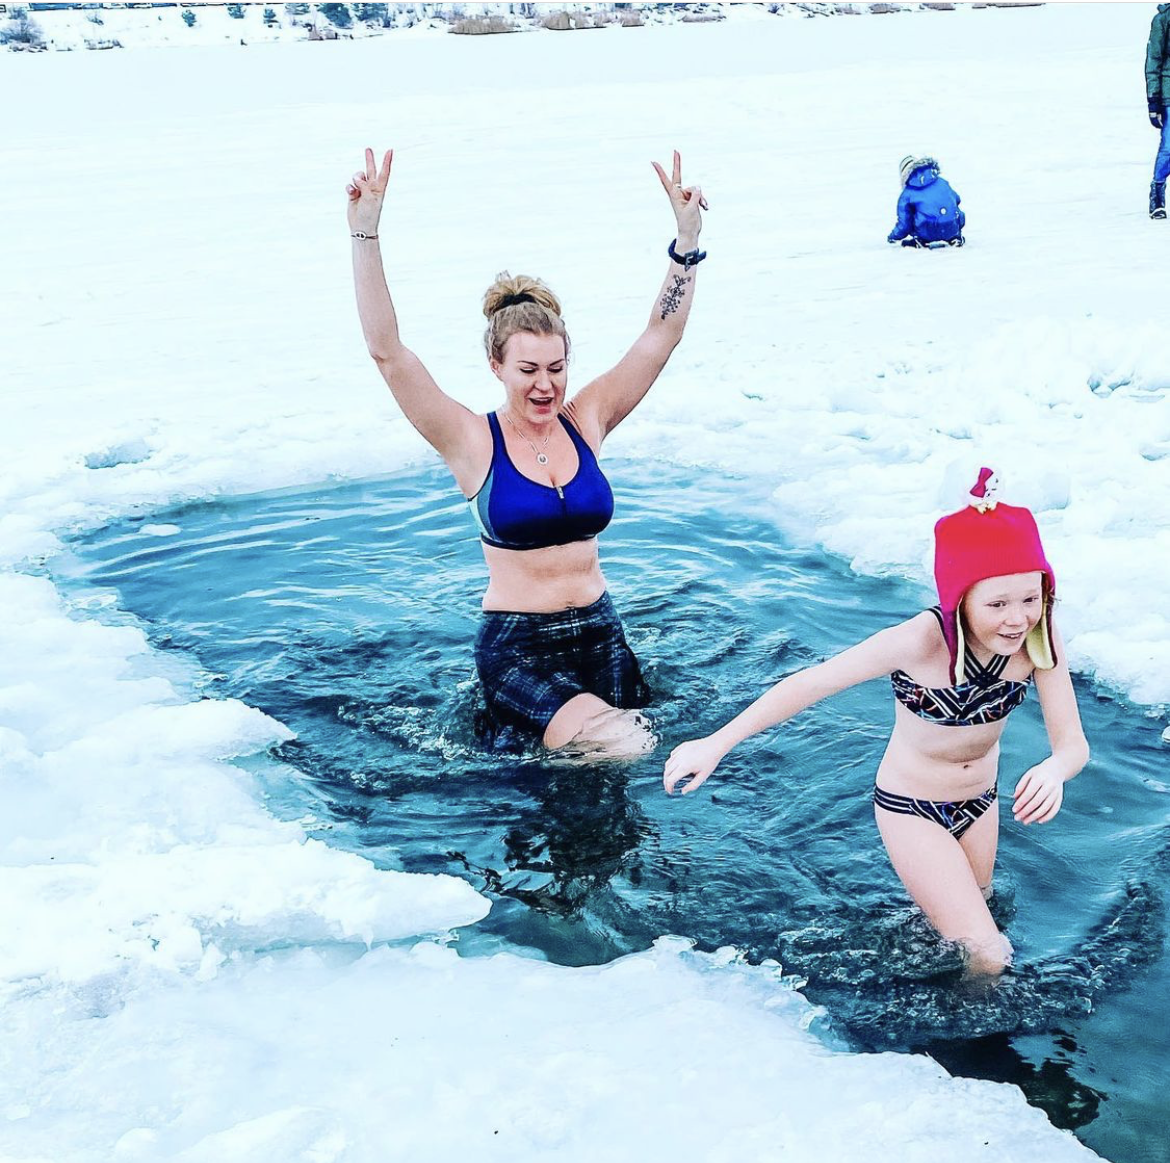 Samantha wearing a Bolder skirt in an ice hole with her child